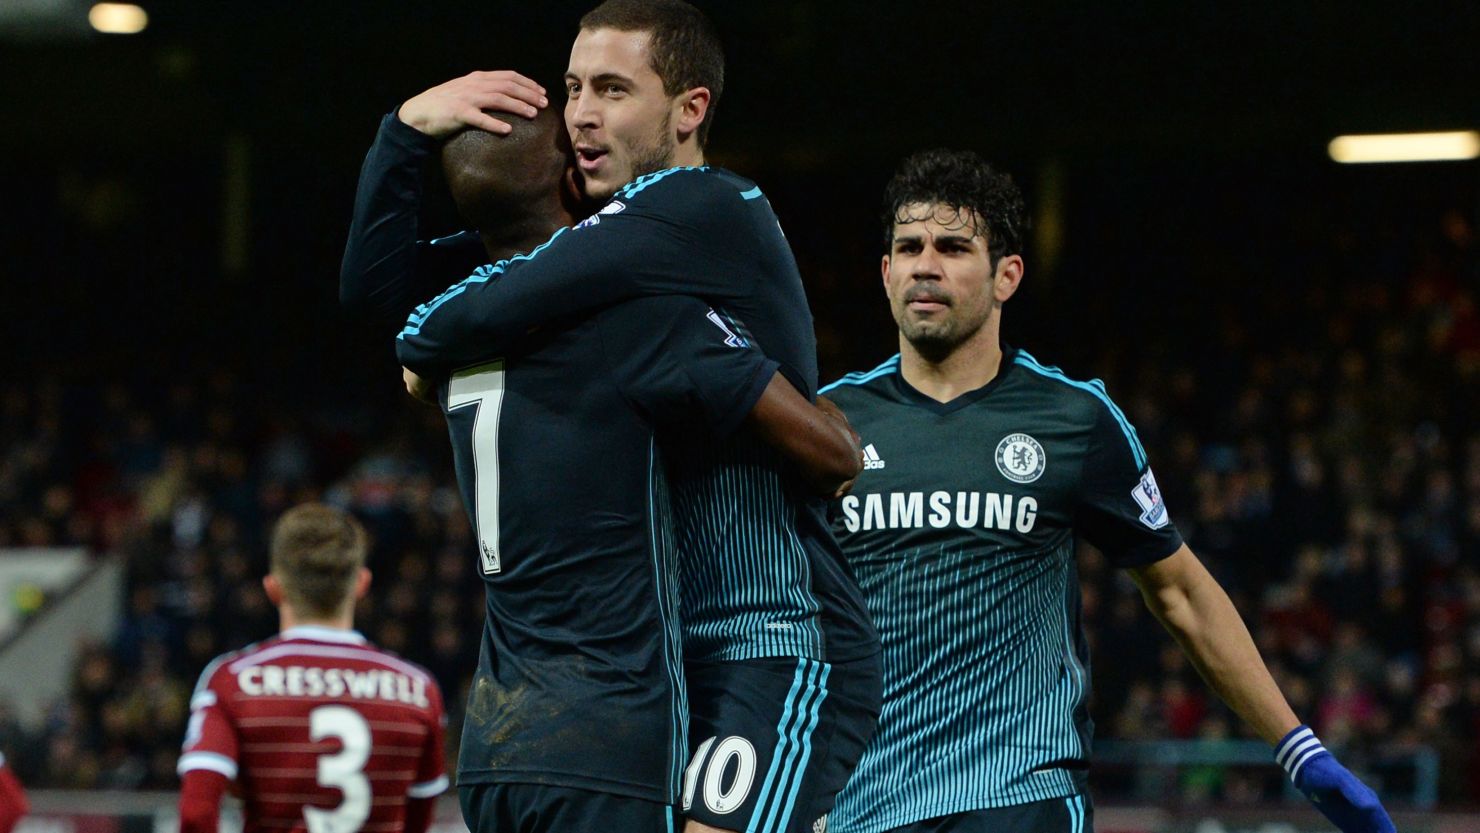 Eden Hazard scored the lone goal in Chelsea's 1-0 win at West Ham in the Premier League on Wednesday. 